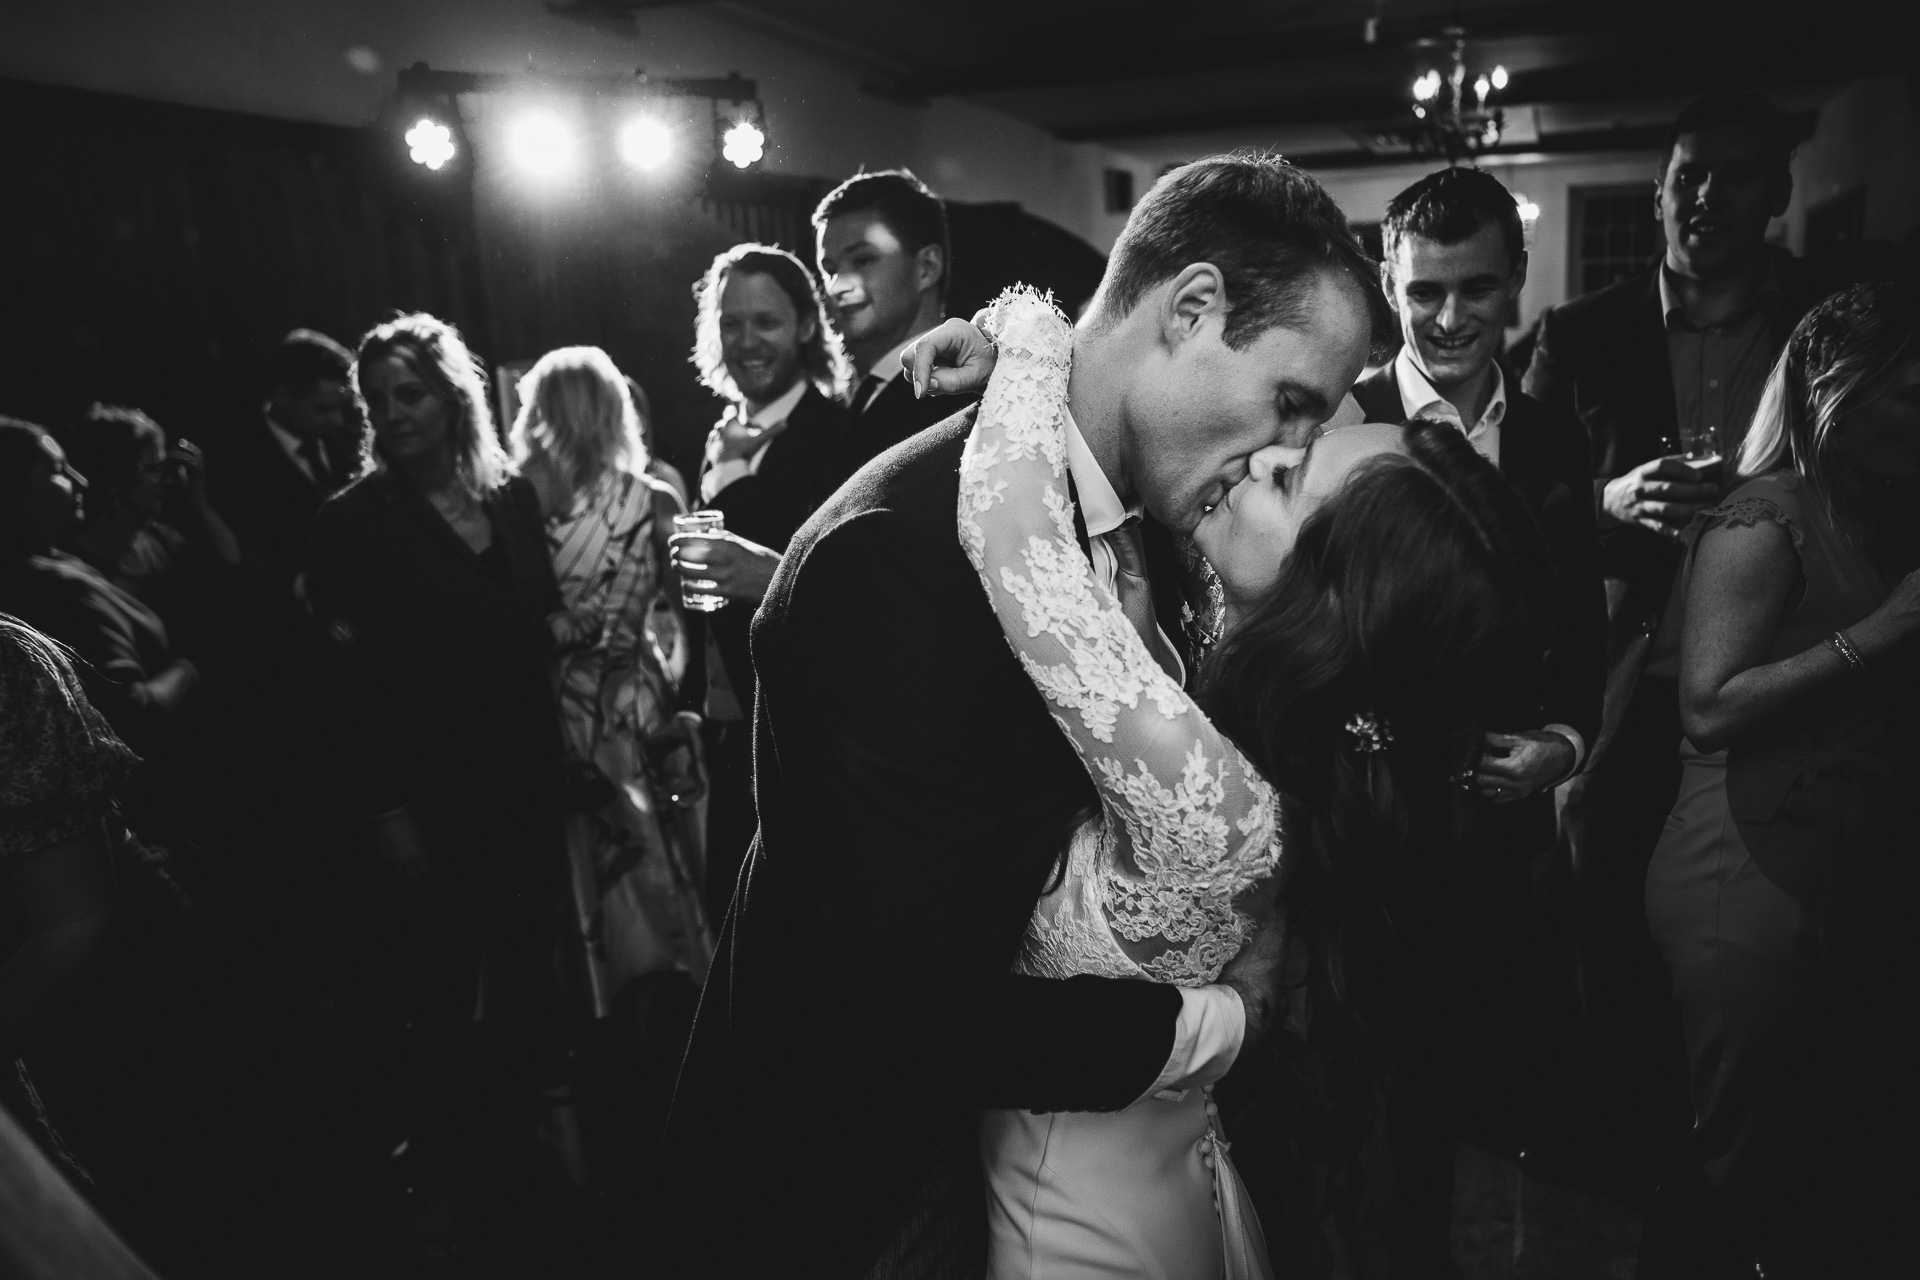 A bride and groom kissing on a dance floor surrounded by other people